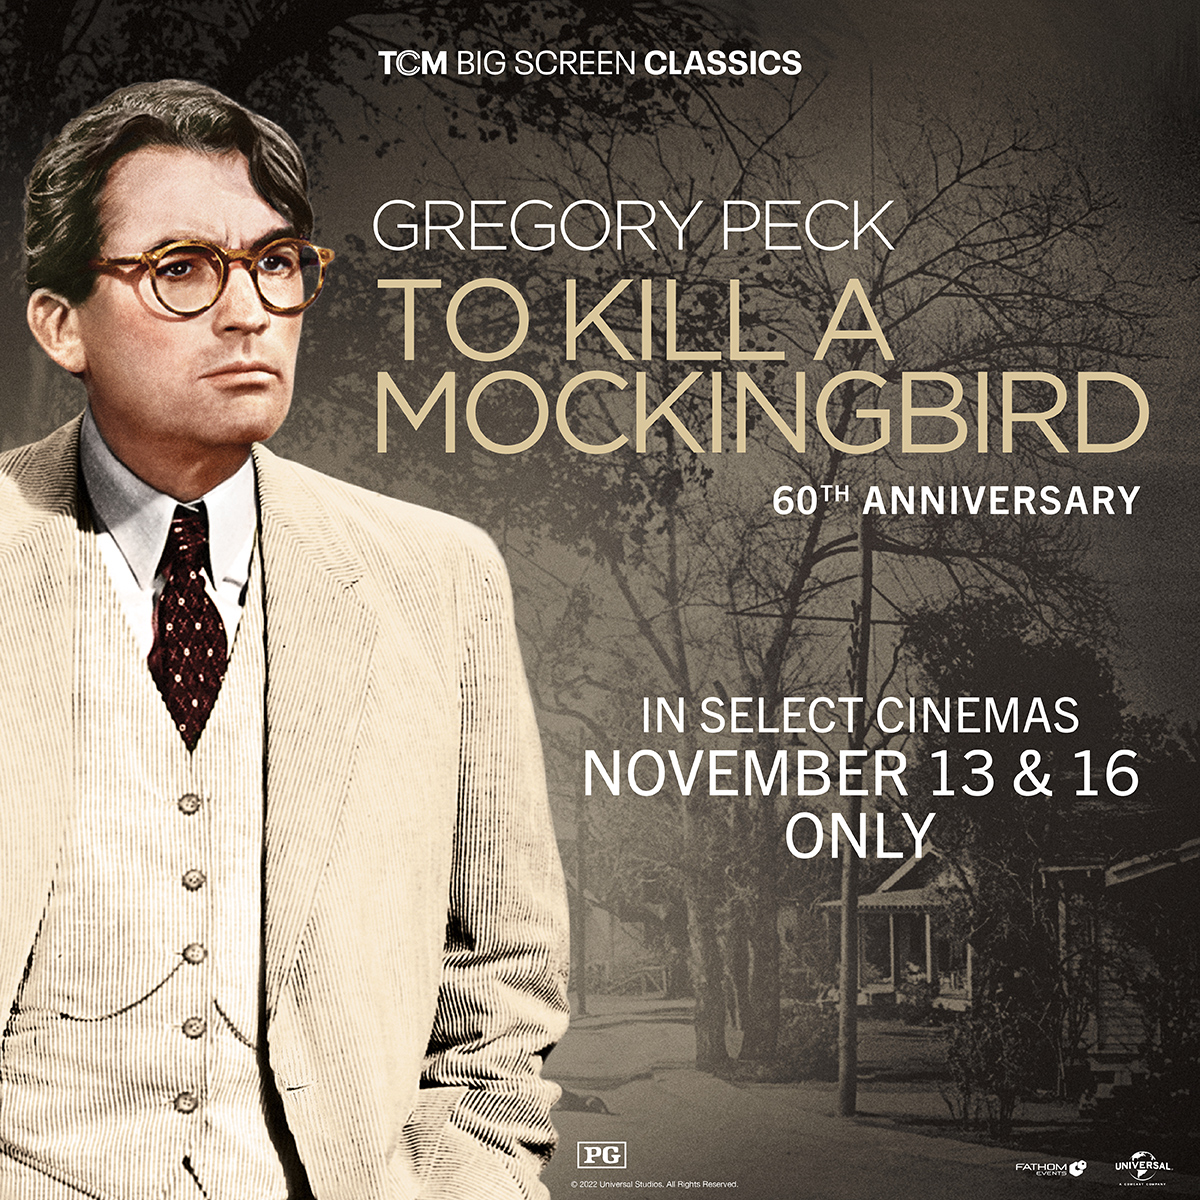 ❓DID YOU KNOW❓After being offered the role of Atticus Finch, Gregory Peck read To Kill a Mockingbird in one sitting & immediately called the director to say he would gladly play the role. Witness Peck's performance in theaters nationwide Nov 13 & 16. hubs.ly/Q01pnFXS0